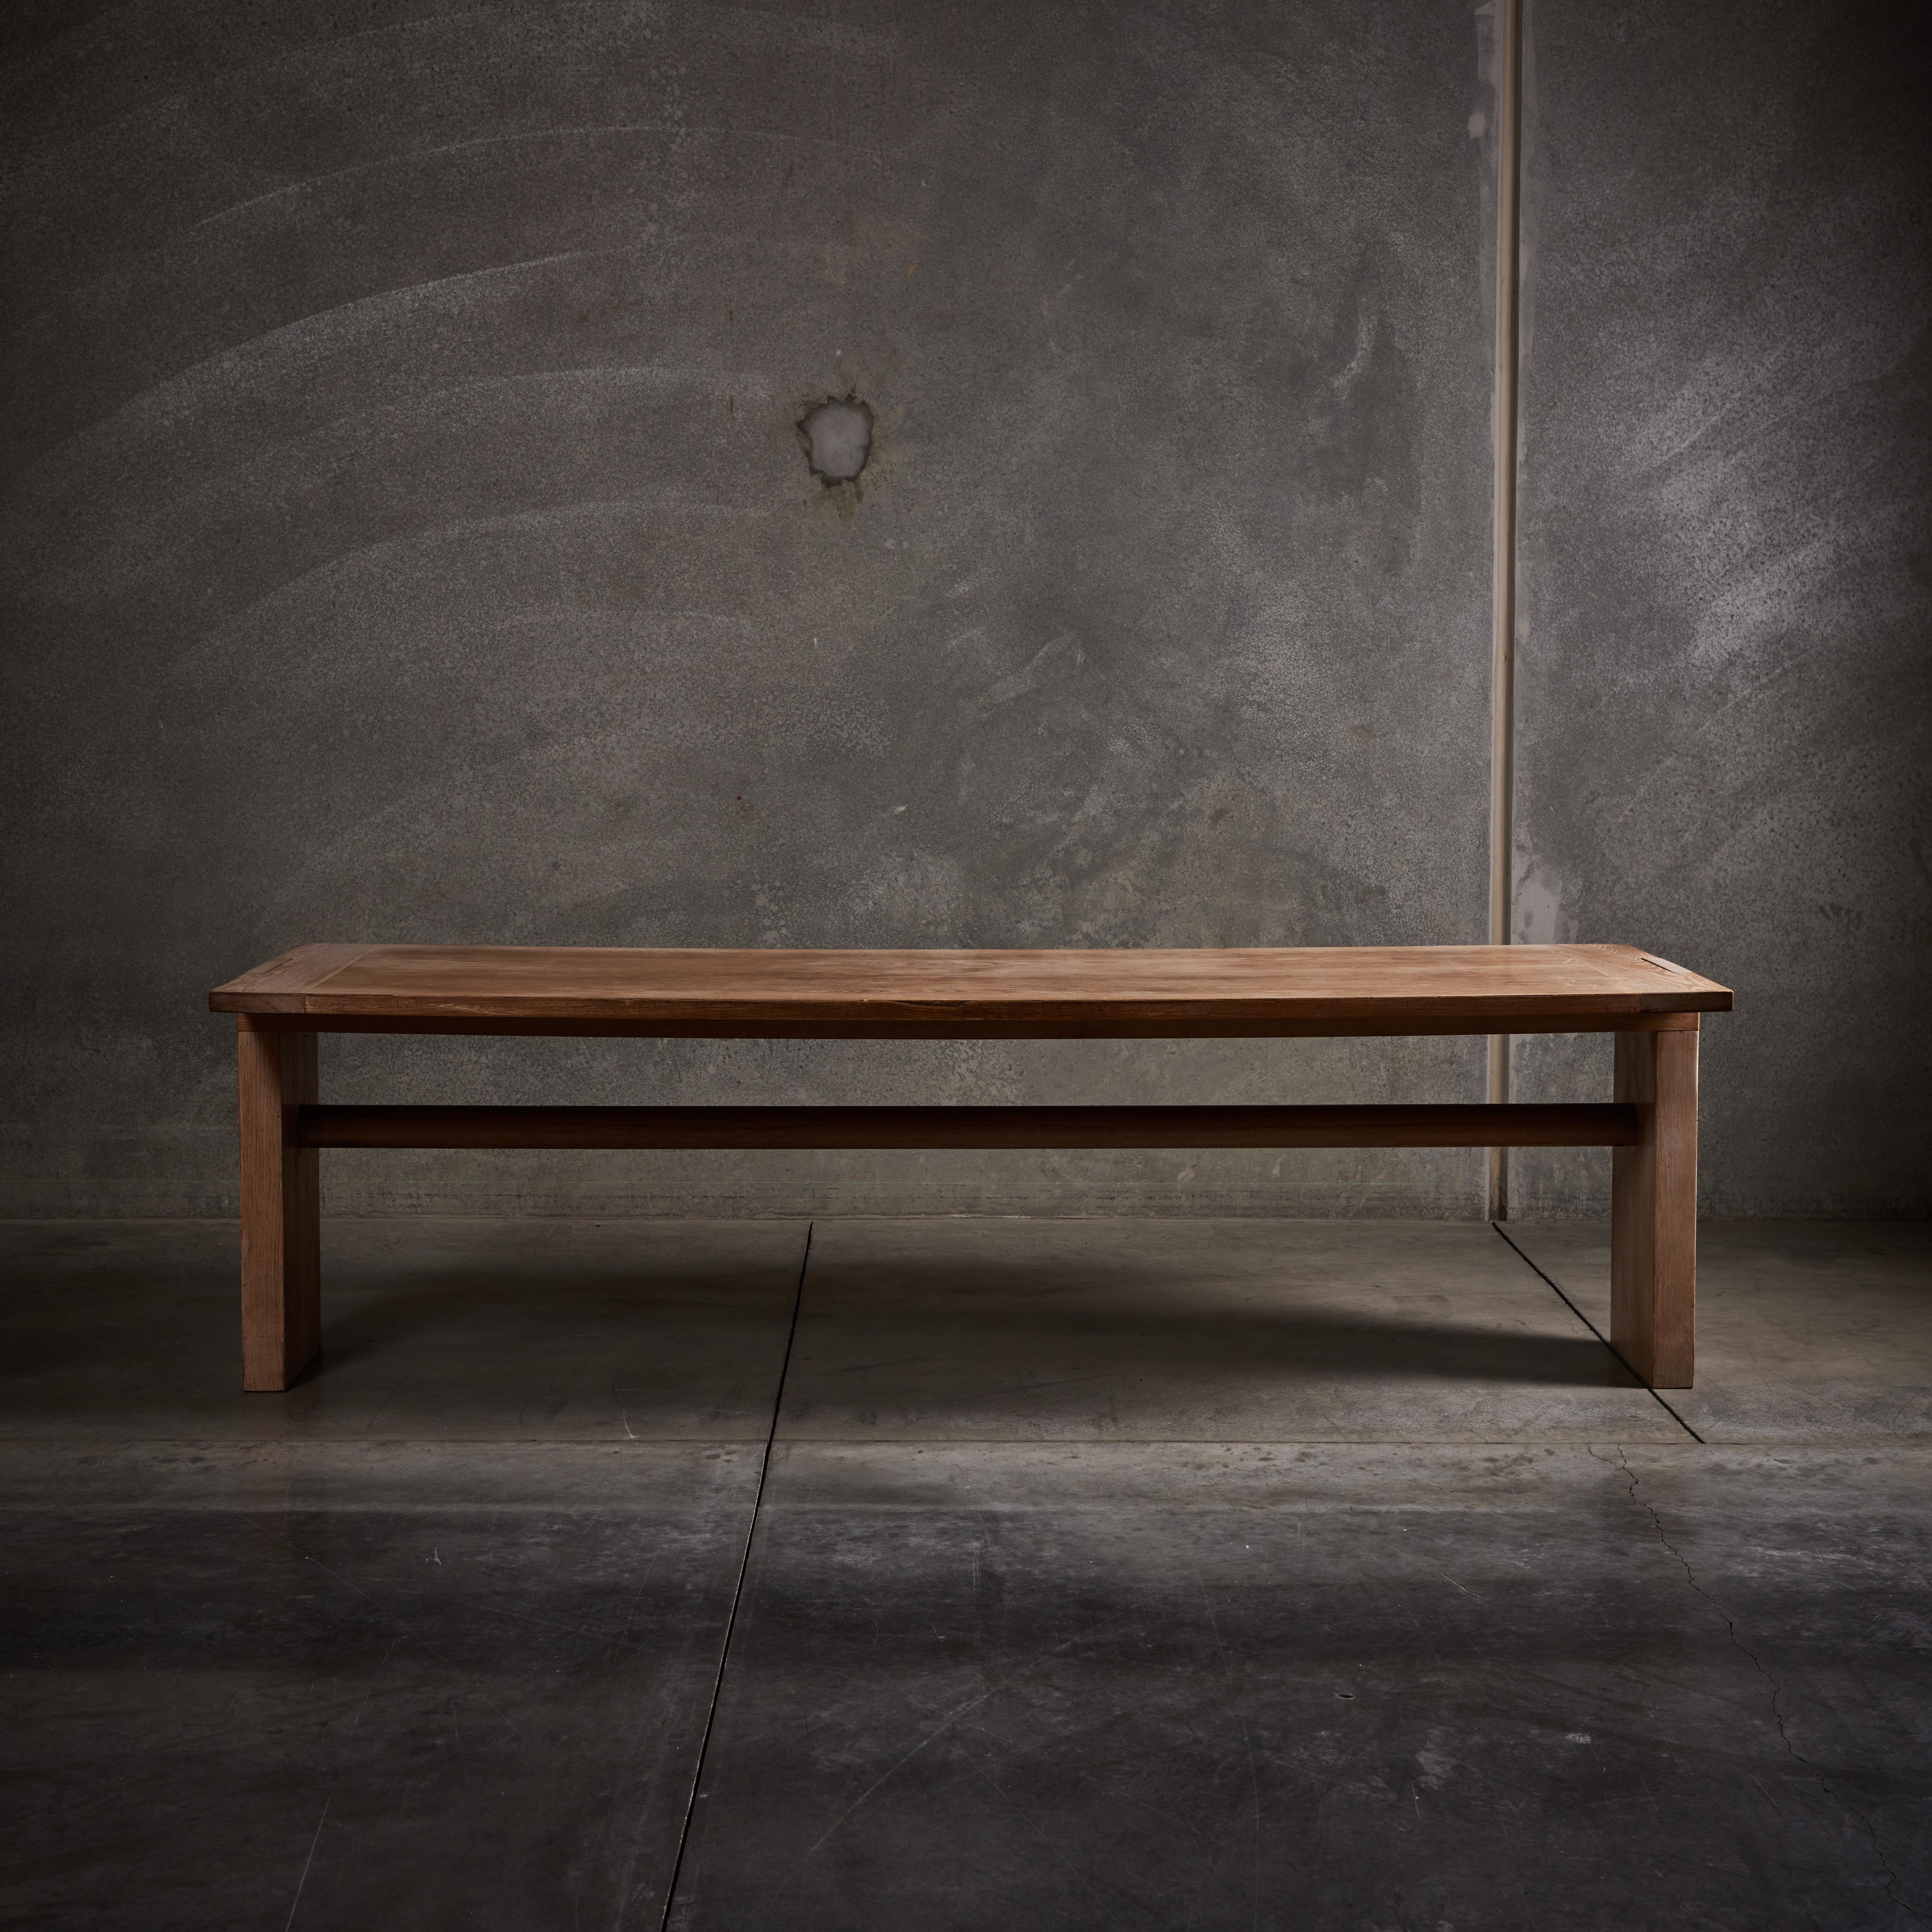 Valmarana table by Carlo Scarpa from the Ultrarazionale collection. Made in Italy, circa 1972

Born in Venice in 1906, Carlo Scarpa studied architectural design at the Royal Academy of fine Arts in Venice. After graduating in 1926, he taught